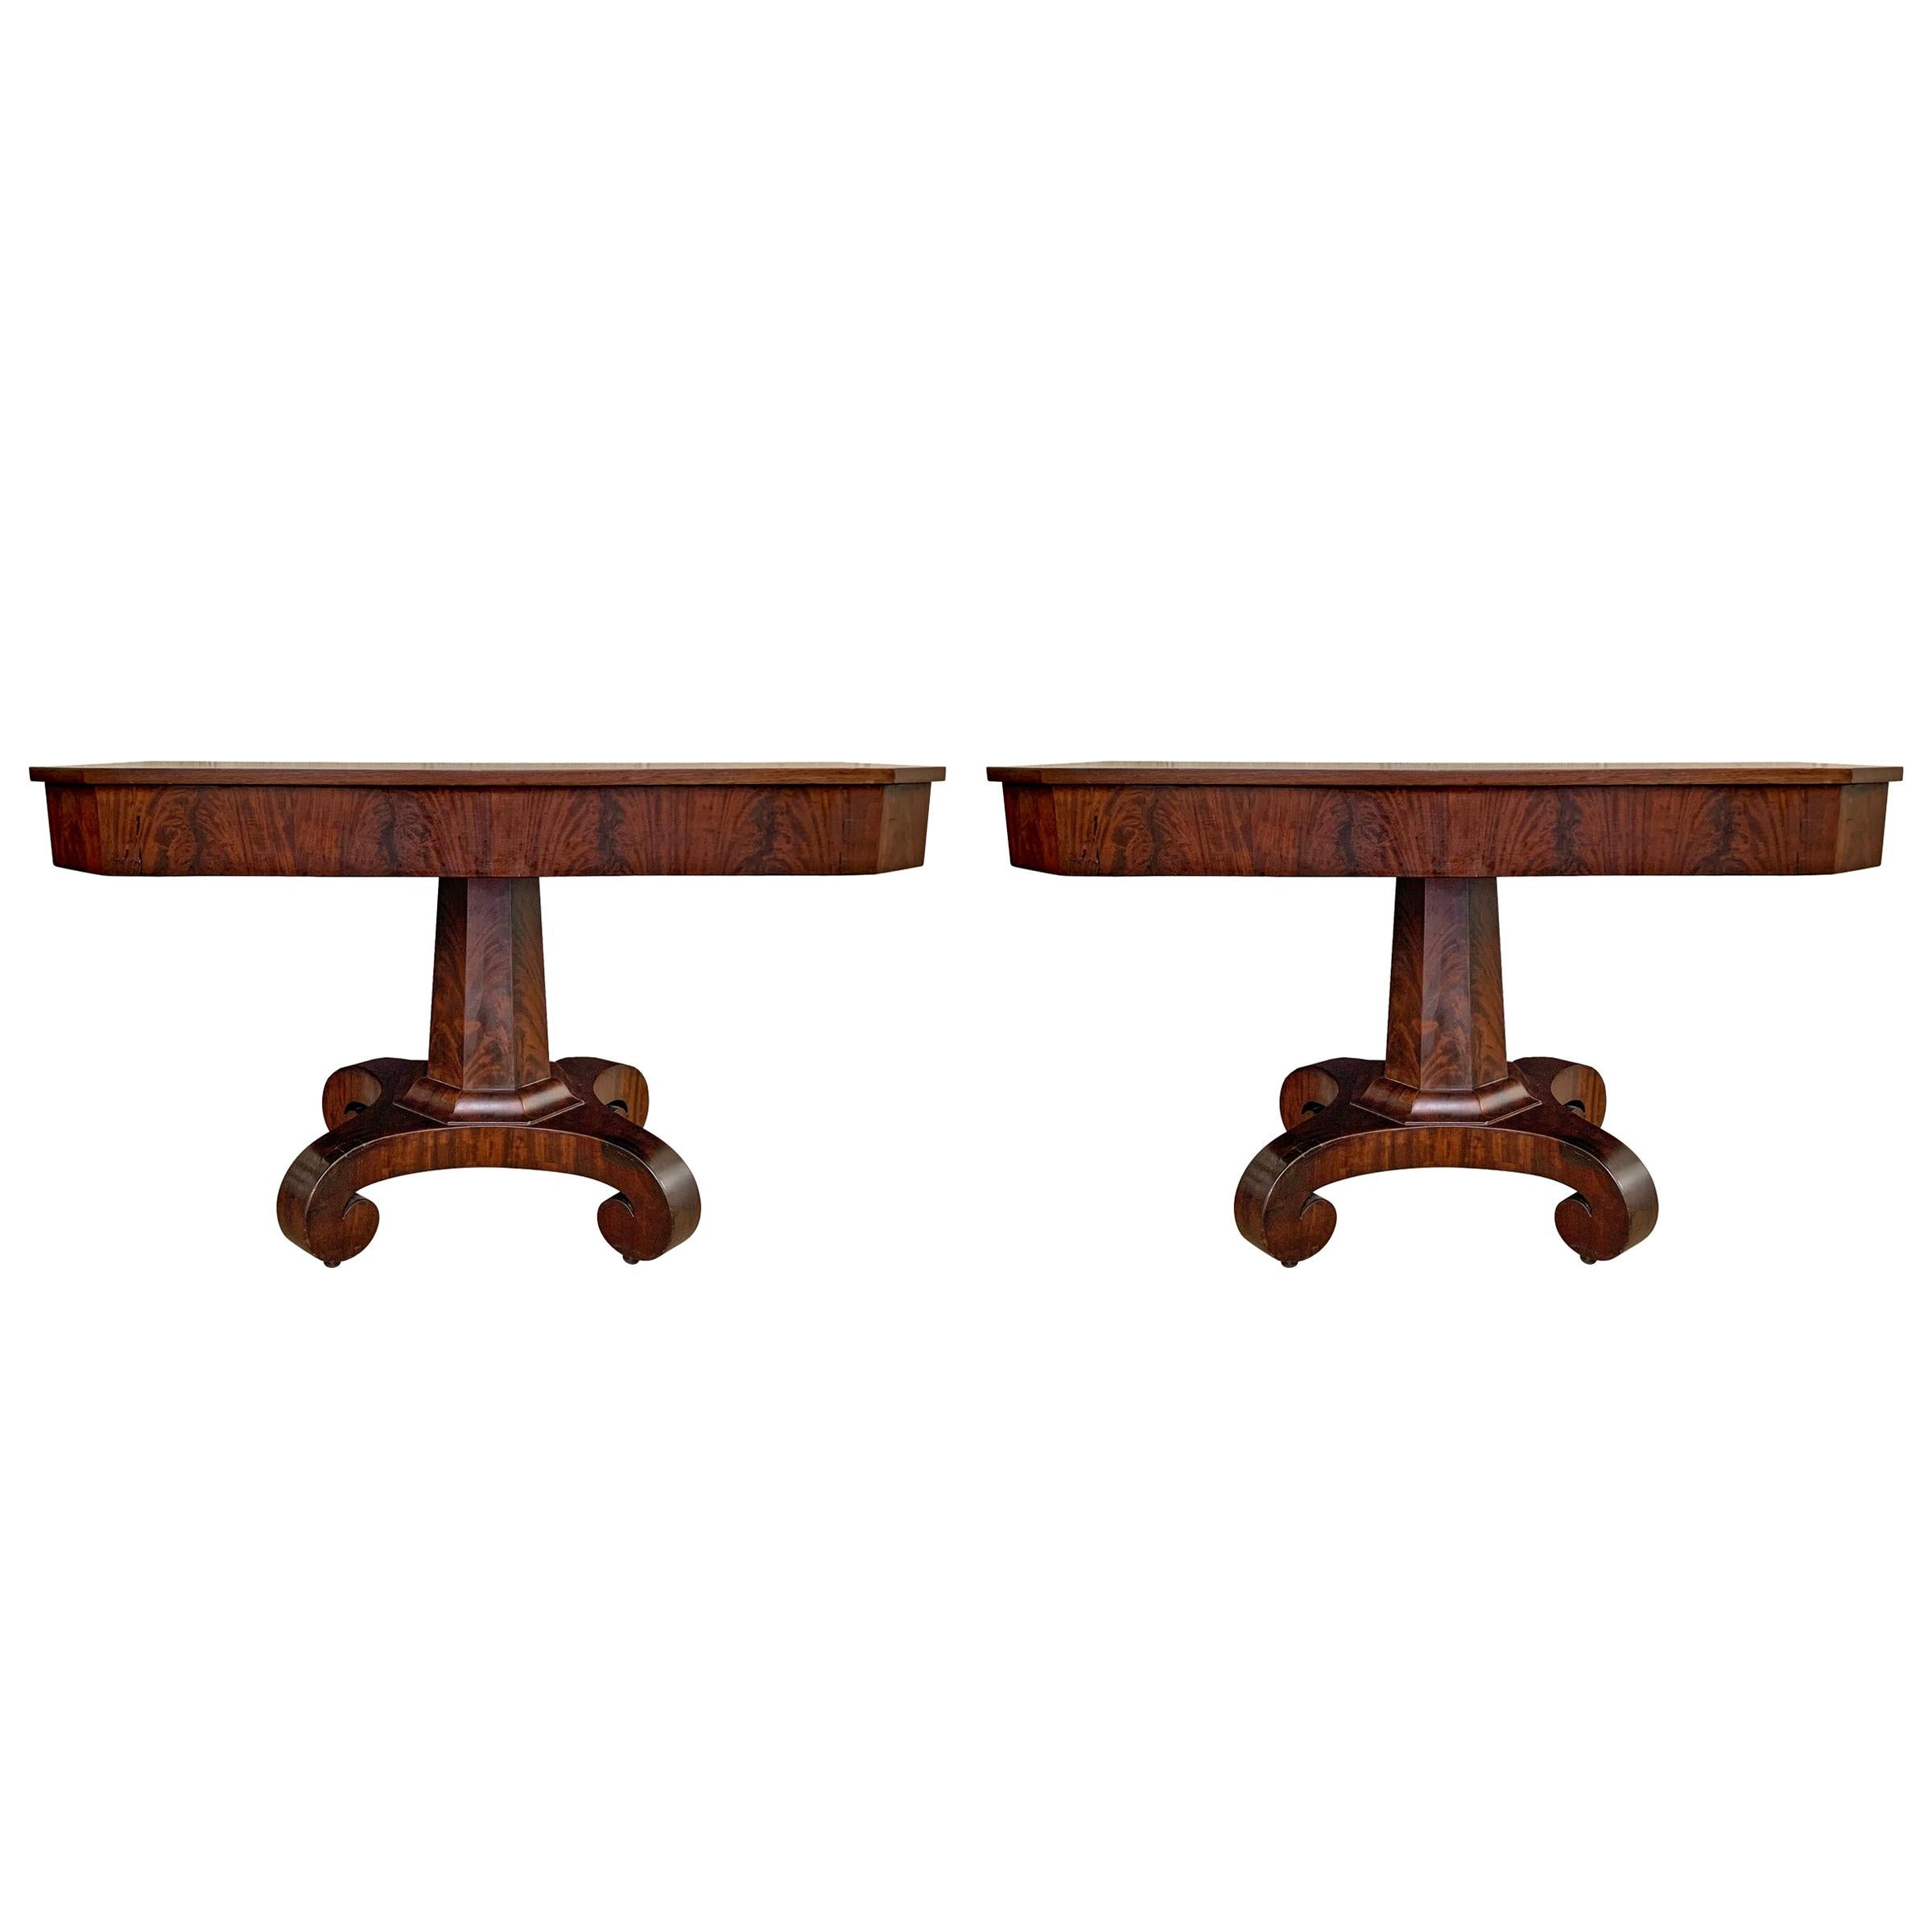 Gorgeous Pair of American Empire Console Tables